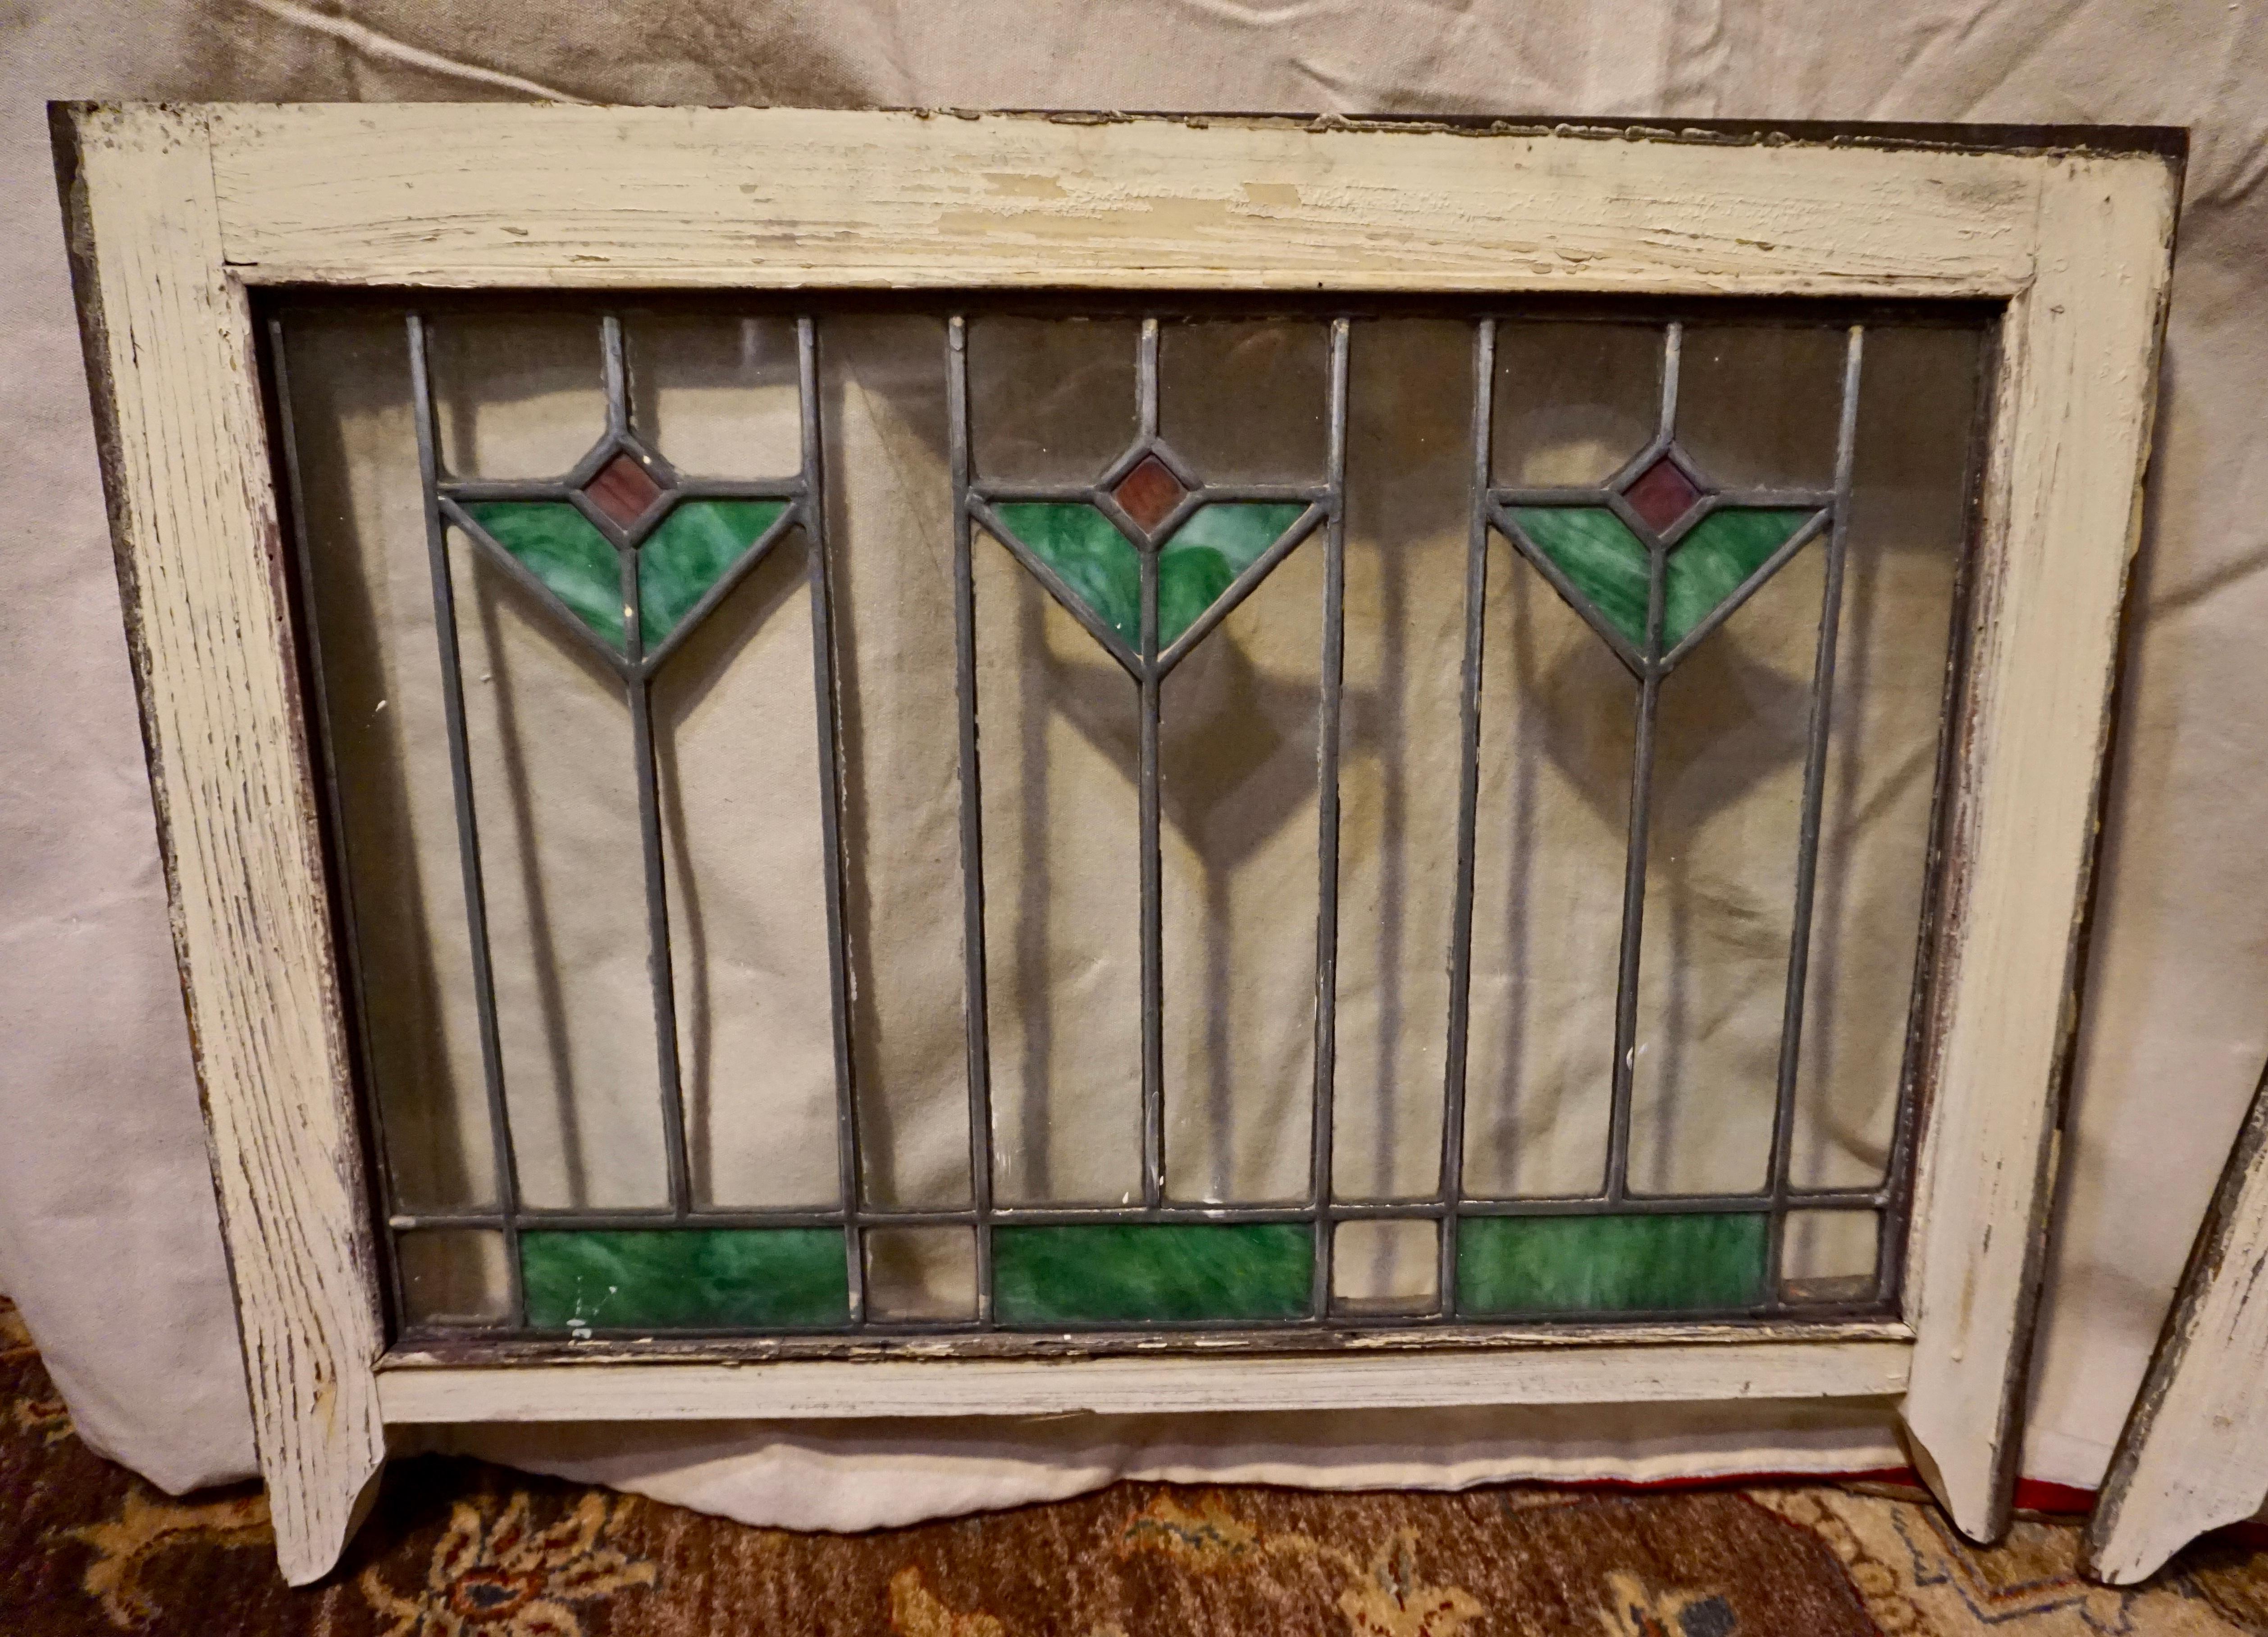 Rare Arts & Crafts Stained Glass Windows with Two-Tone Geometric Floral Theme In Good Condition For Sale In Vancouver, British Columbia